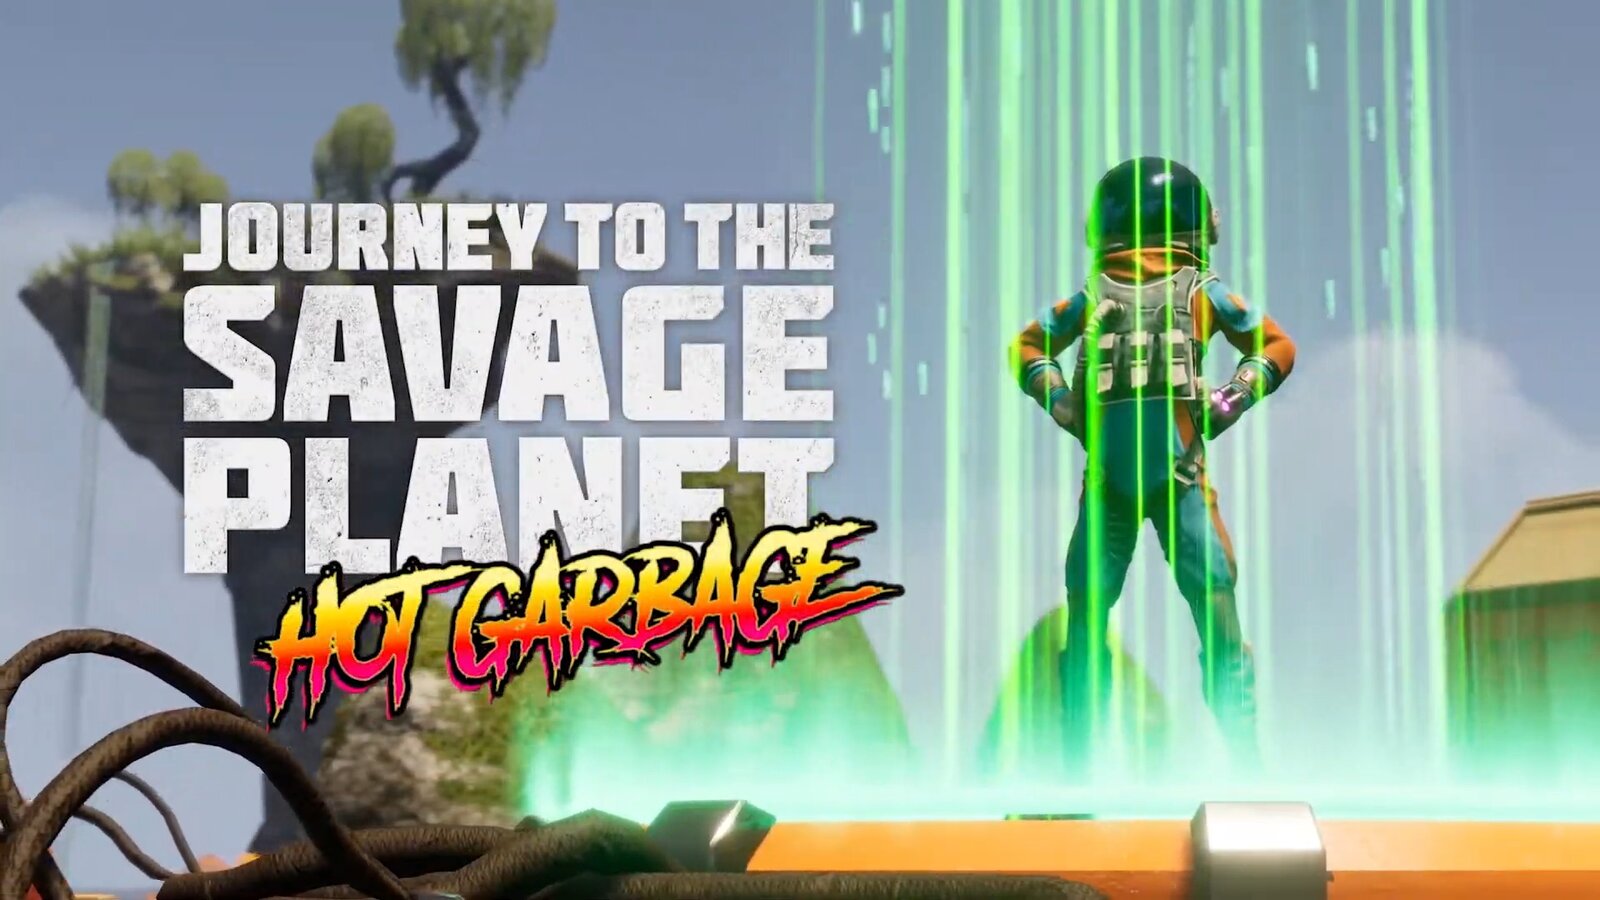 Journey to the Savage Planet - Hot Garbage